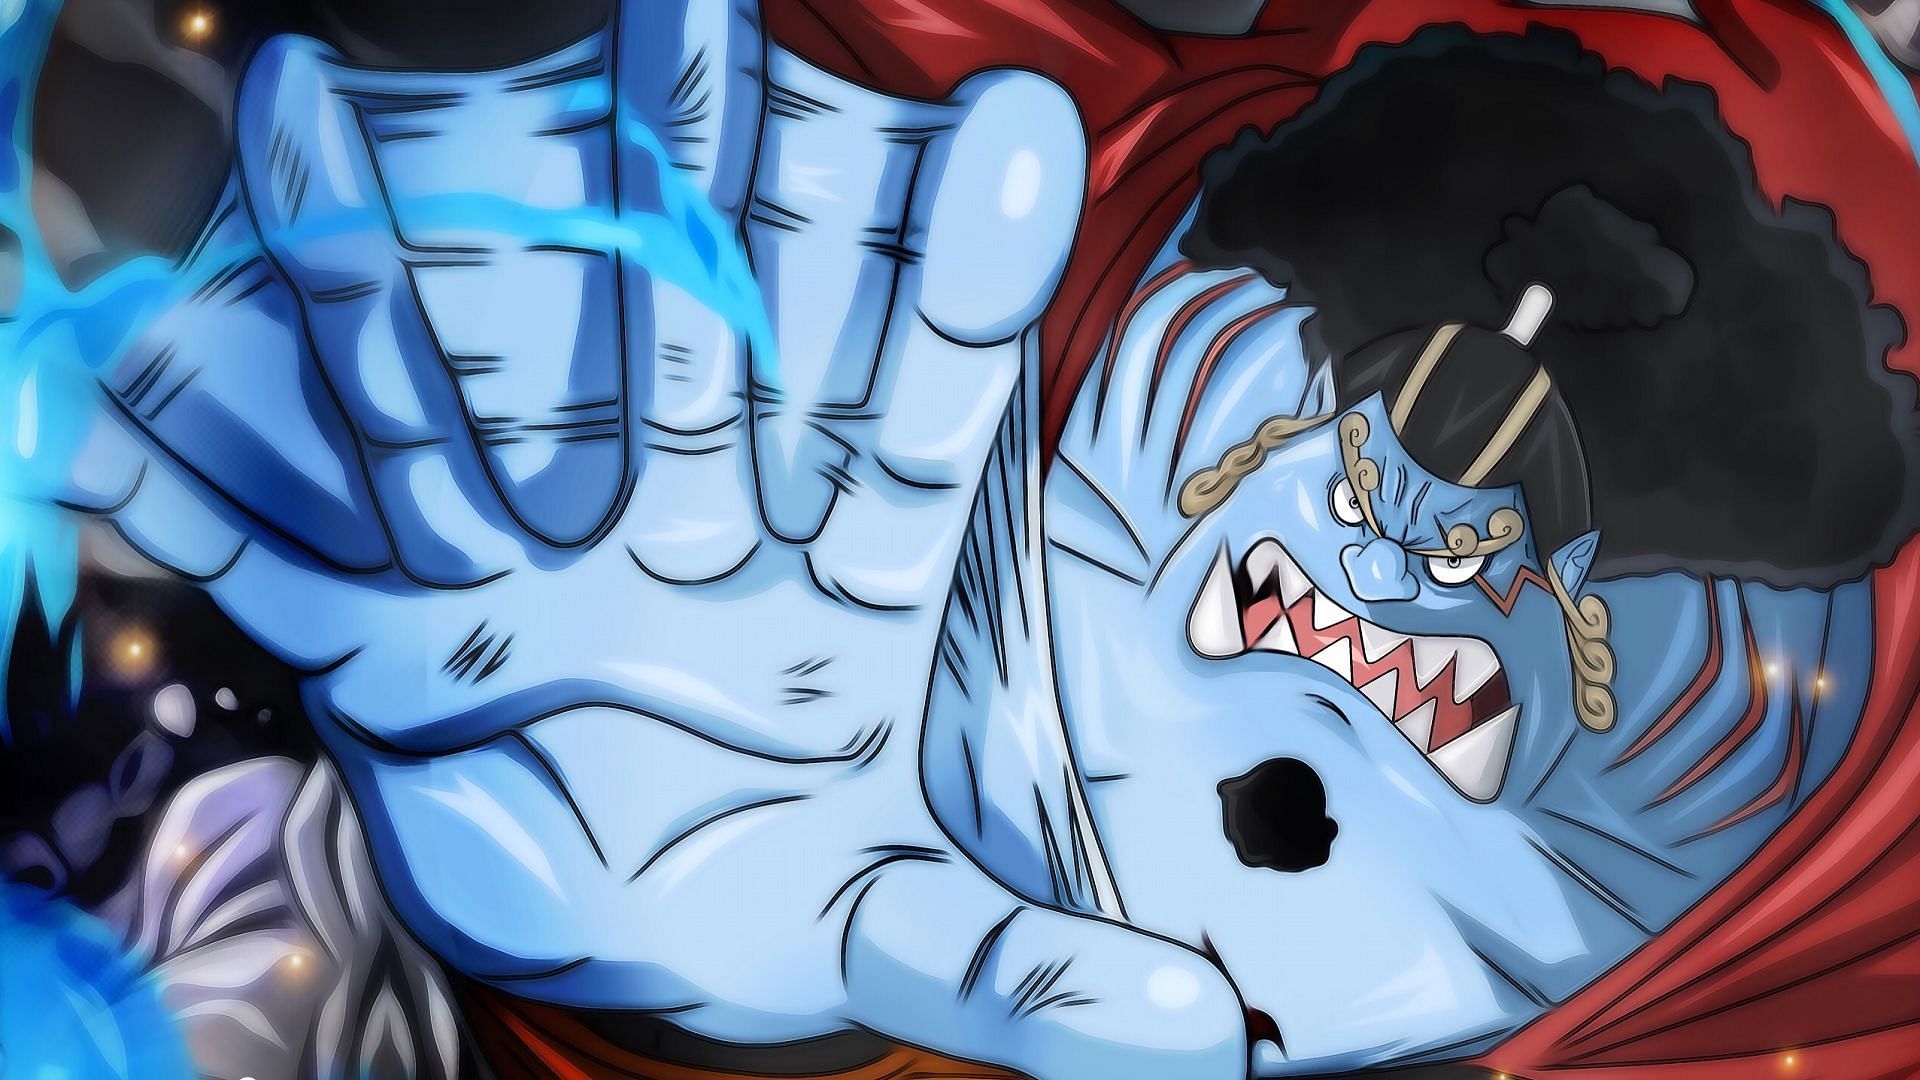 &quot;Knight of the Sea&quot; Jinbe, the latest addiction to the Strawhat Pirates (Image via Eiichiro Oda/Shueisha, One Piece)